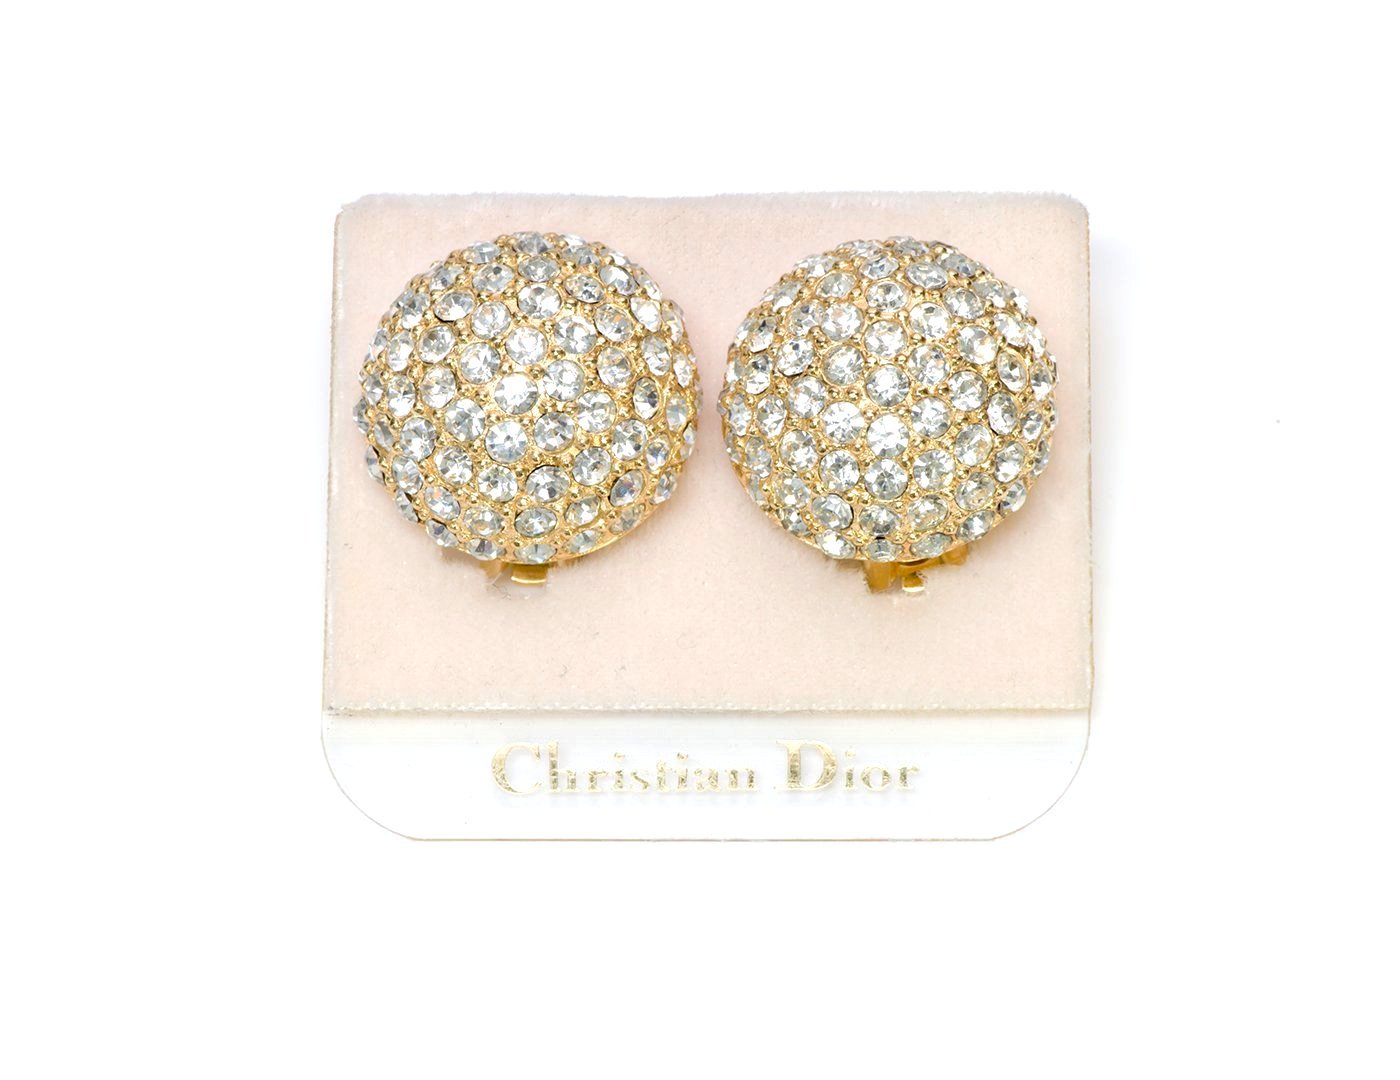 Christian Dior Crystal Earrings - DSF Antique Jewelry